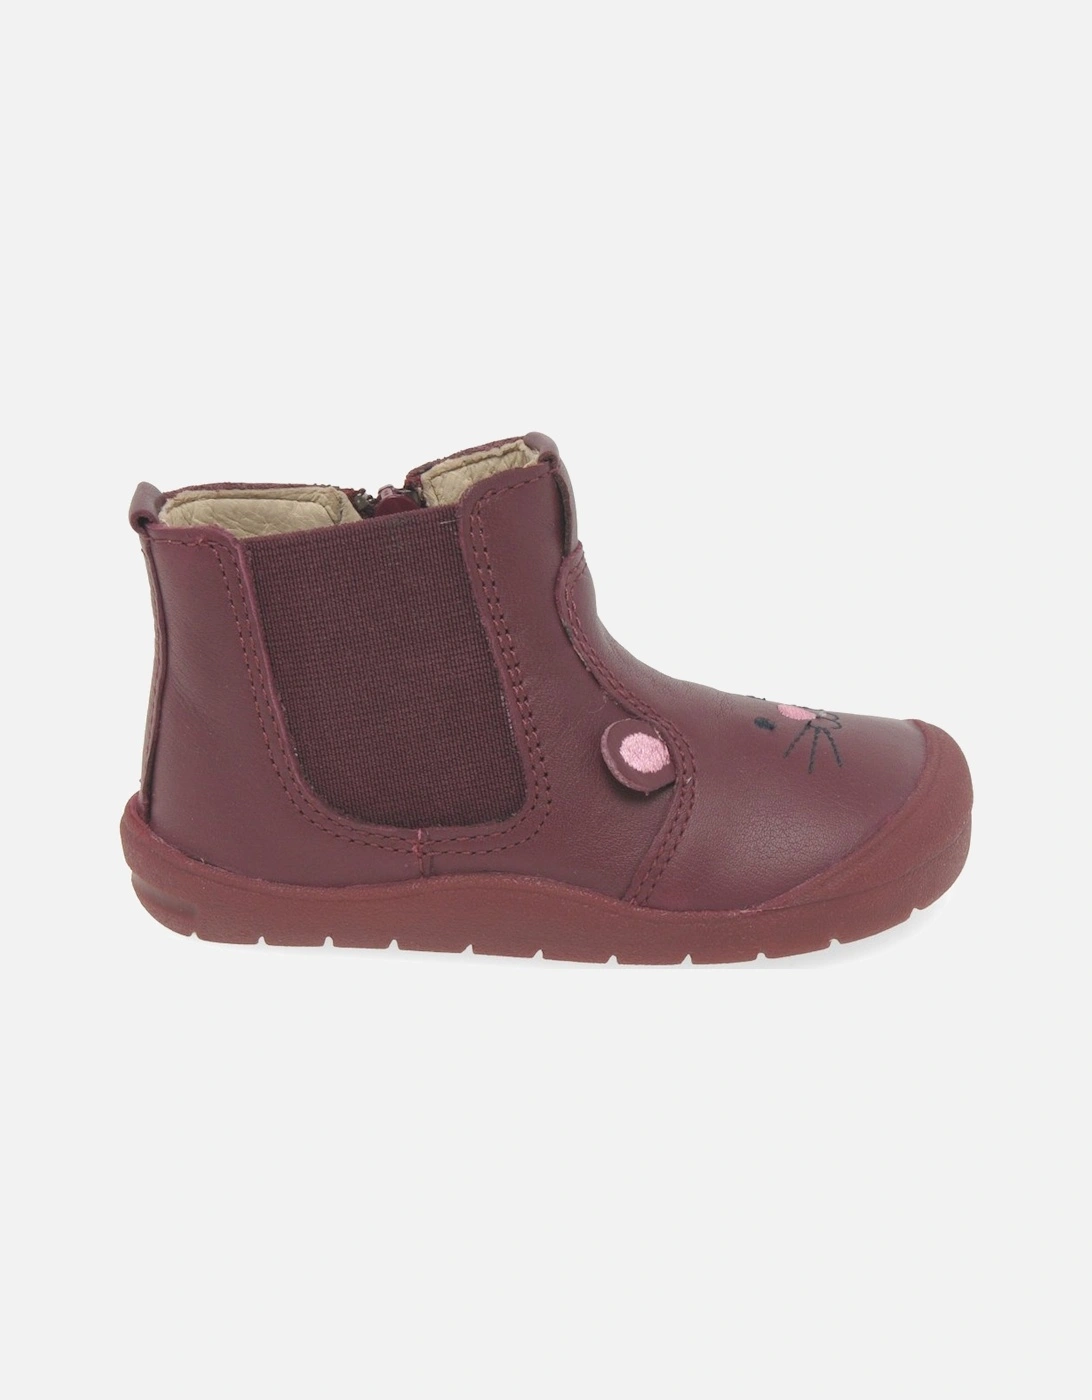 Friend Mouse Girls Infant Boots